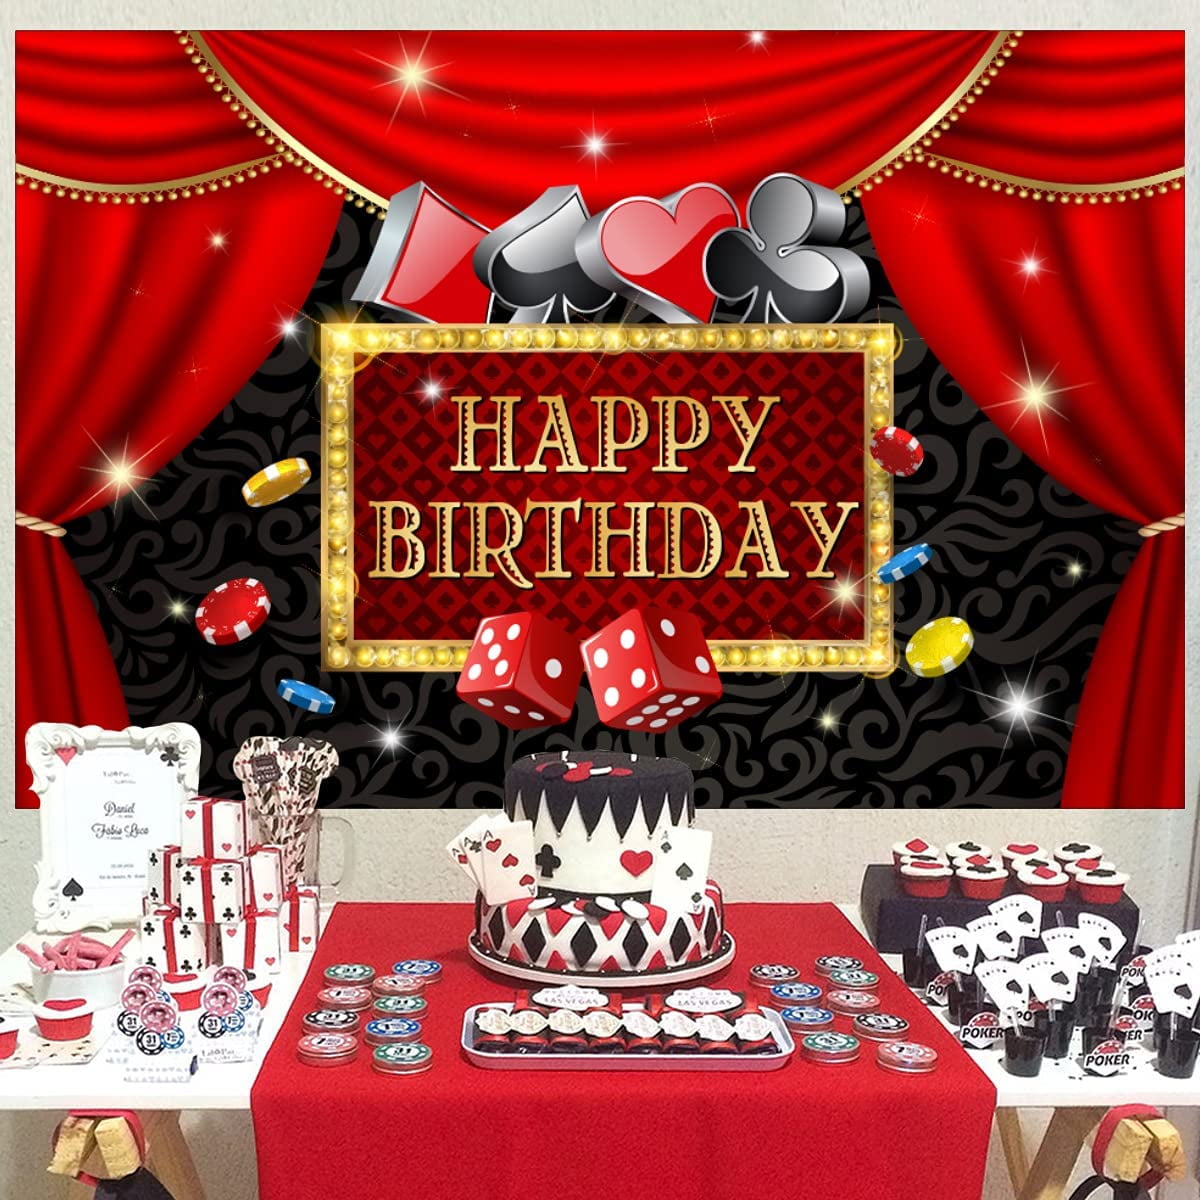  Casino Theme Party Decorations 133PCS Red and Black Gold  Balloon Garland Arch Kit with Dice Foil Balloons for Las Vegas Theme  Birthday Party Decorations : Toys & Games